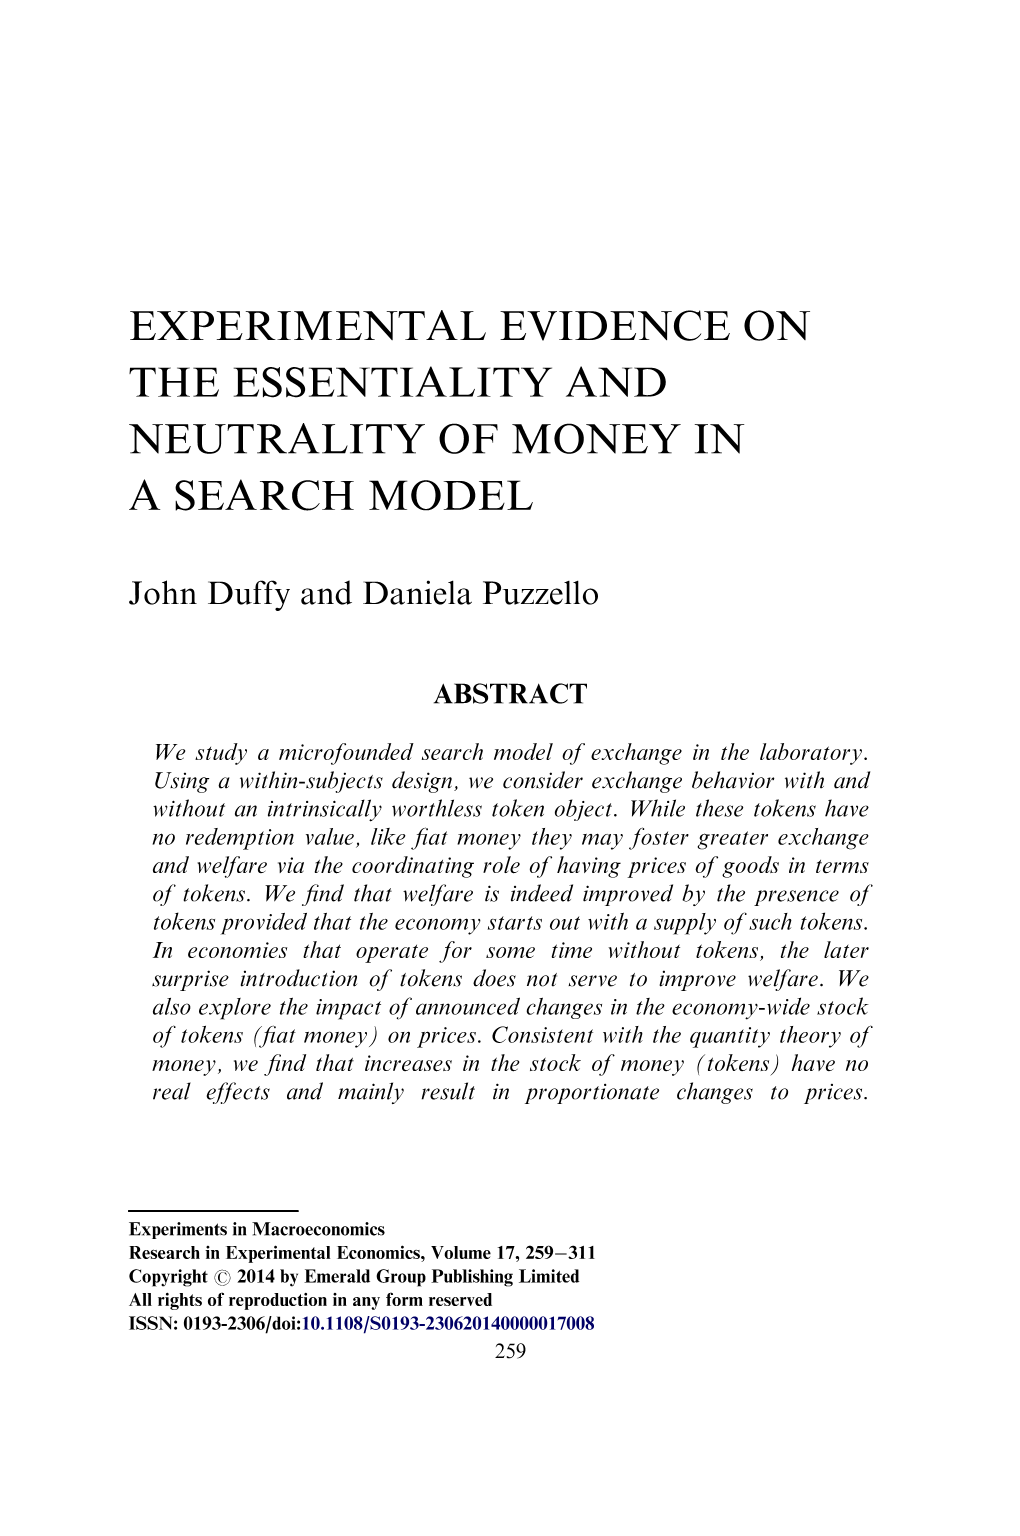 Experimental Evidence on the Essentiality and Neutrality of Money in a Search Model